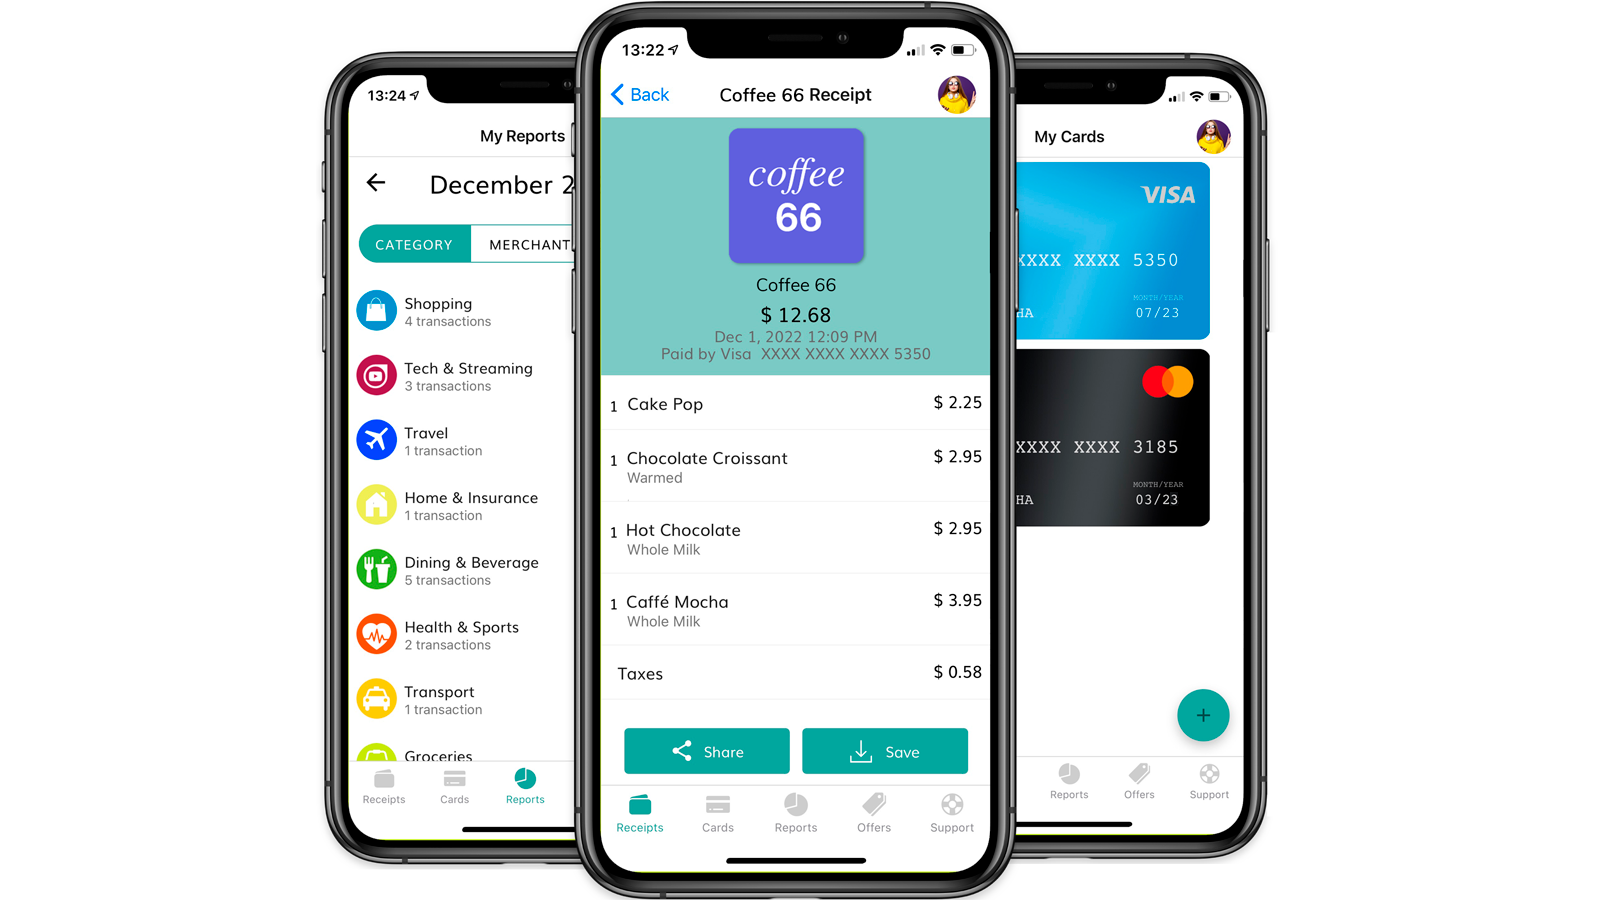 Consumer App with your digital receipts